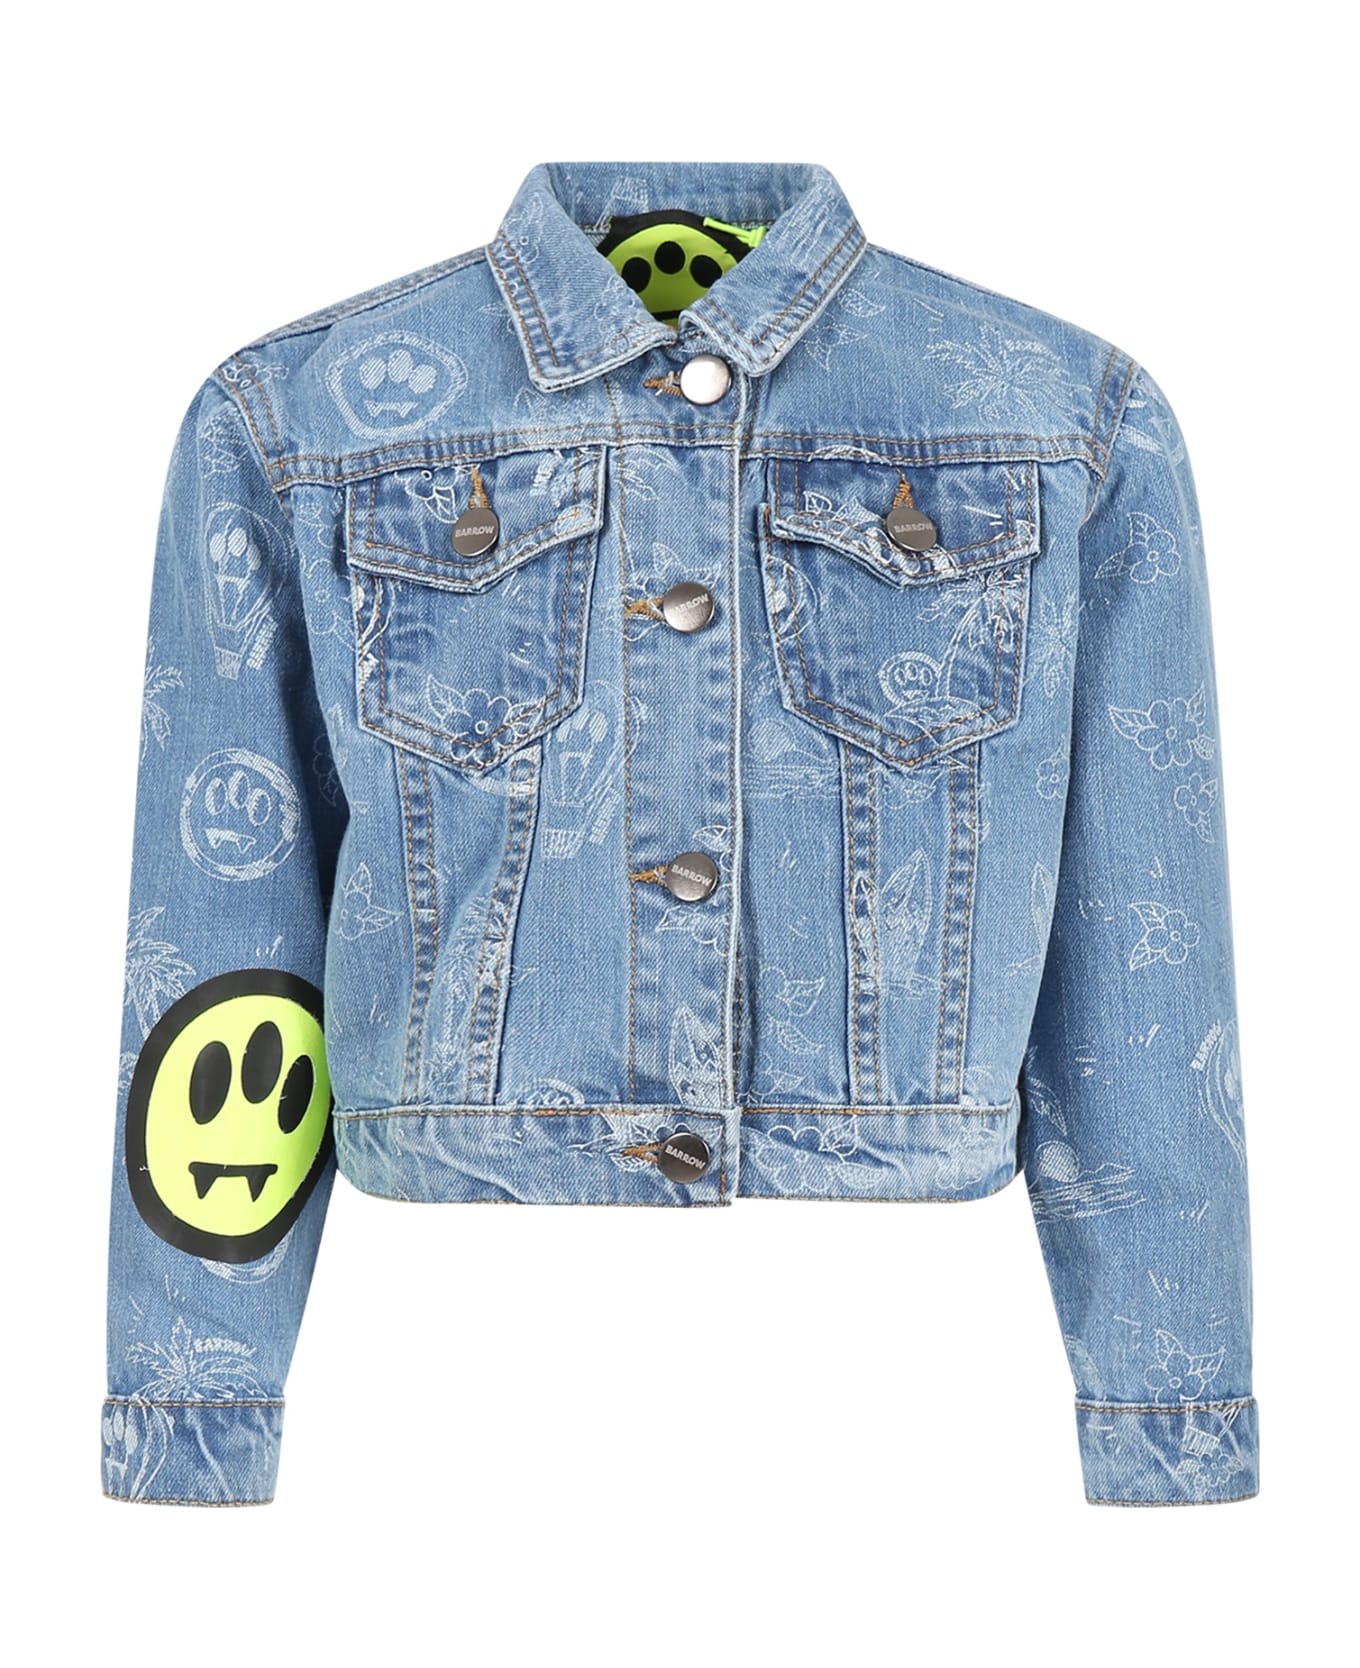 Barrow Light Blue Jacket For Kids With Iconic Smiley - Denim